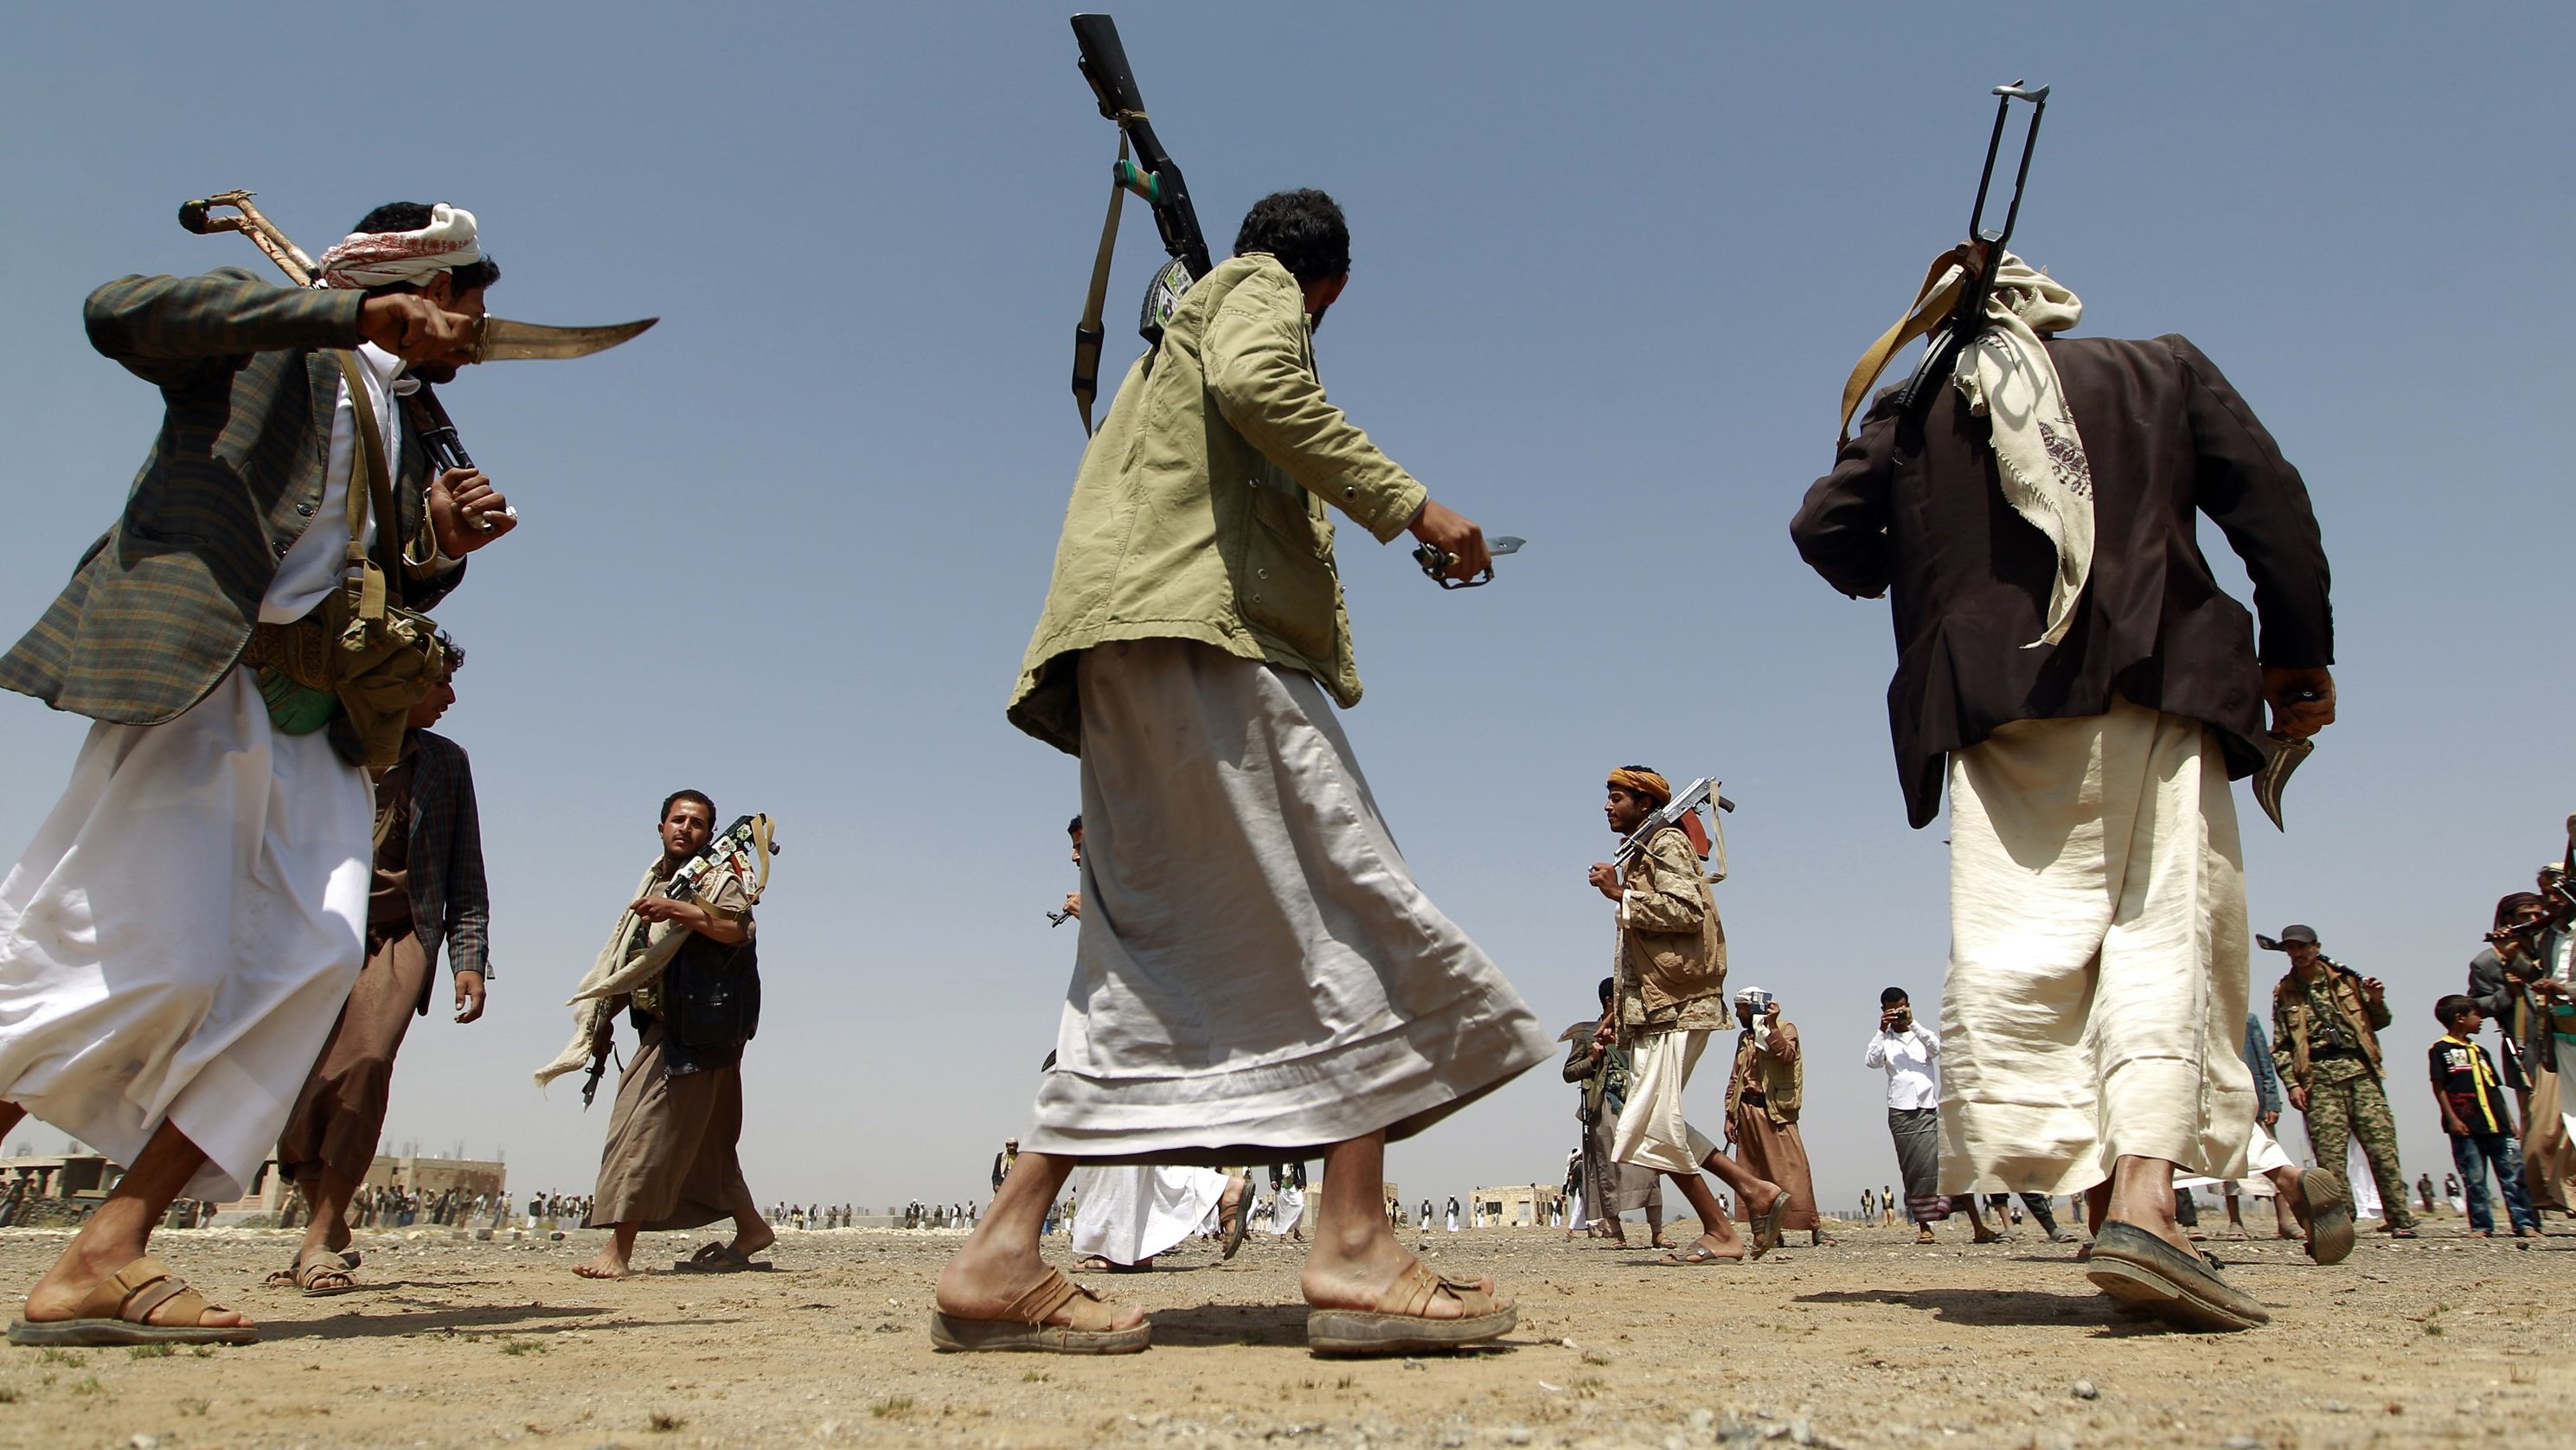 Tribal gunmen loyal to the Shiite-Houthi movement walk holding their weapons during a gathering against the Saudi-led intervention in the country in the Bani al-Harith area, north of the capital Sanaa, on August 6, 2015.